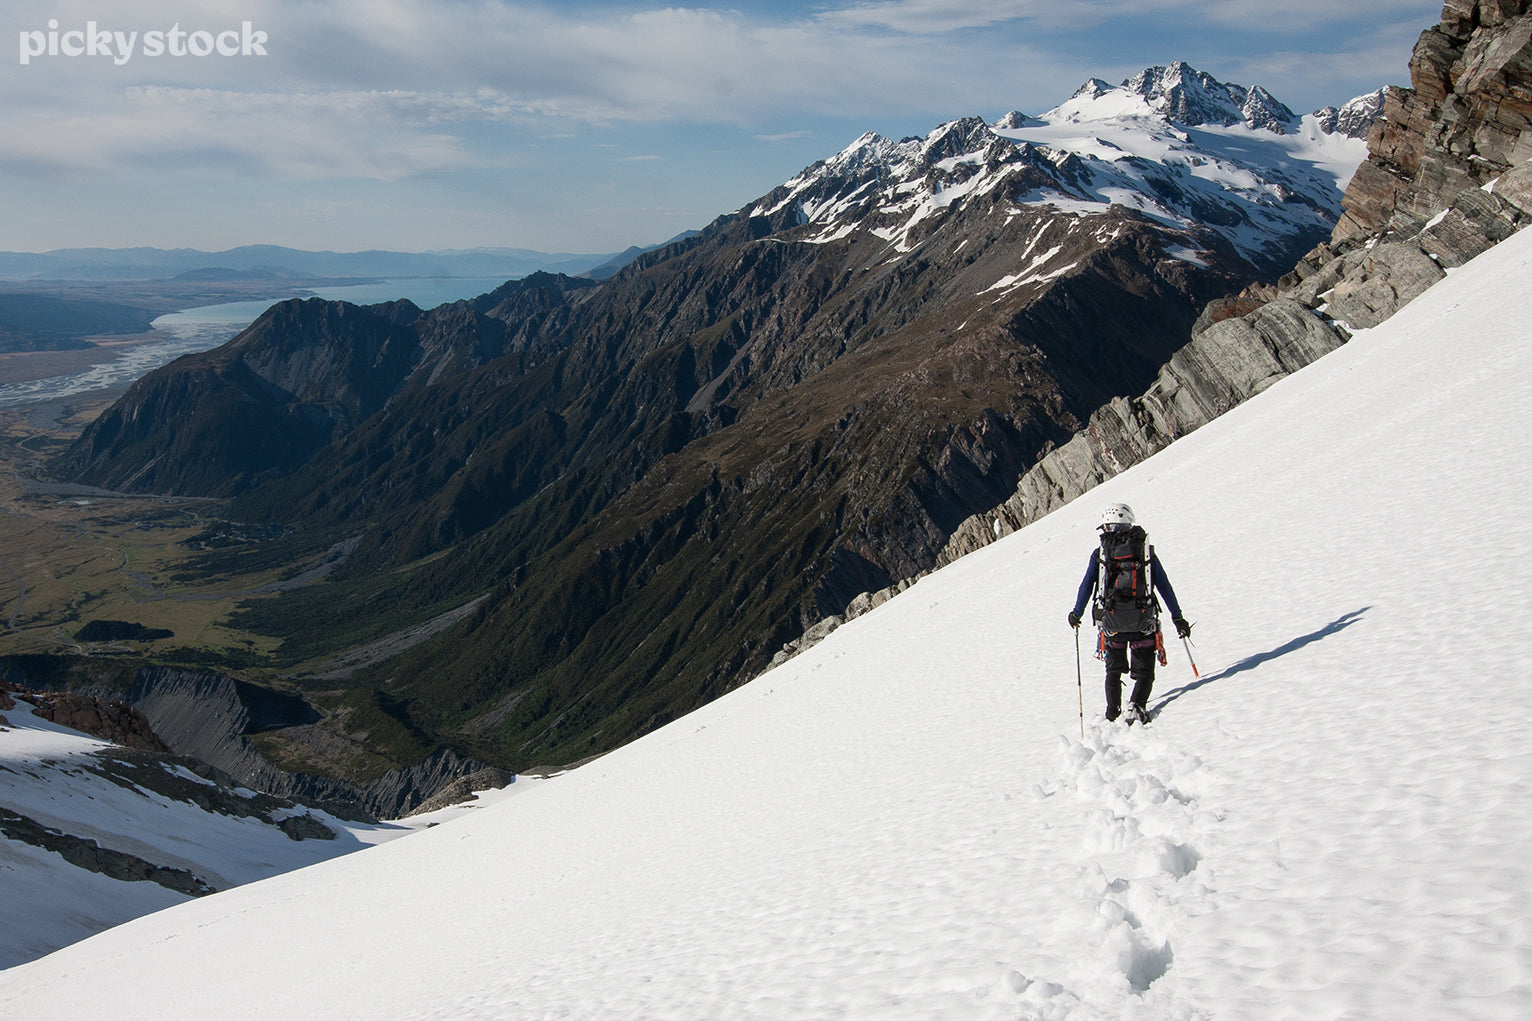 Landscape of a mountain climber with a white climbing helmet and backpack traversing a snowy slope, a deep trail forms behind them. The climber looks outwards to a green valley and river below them.